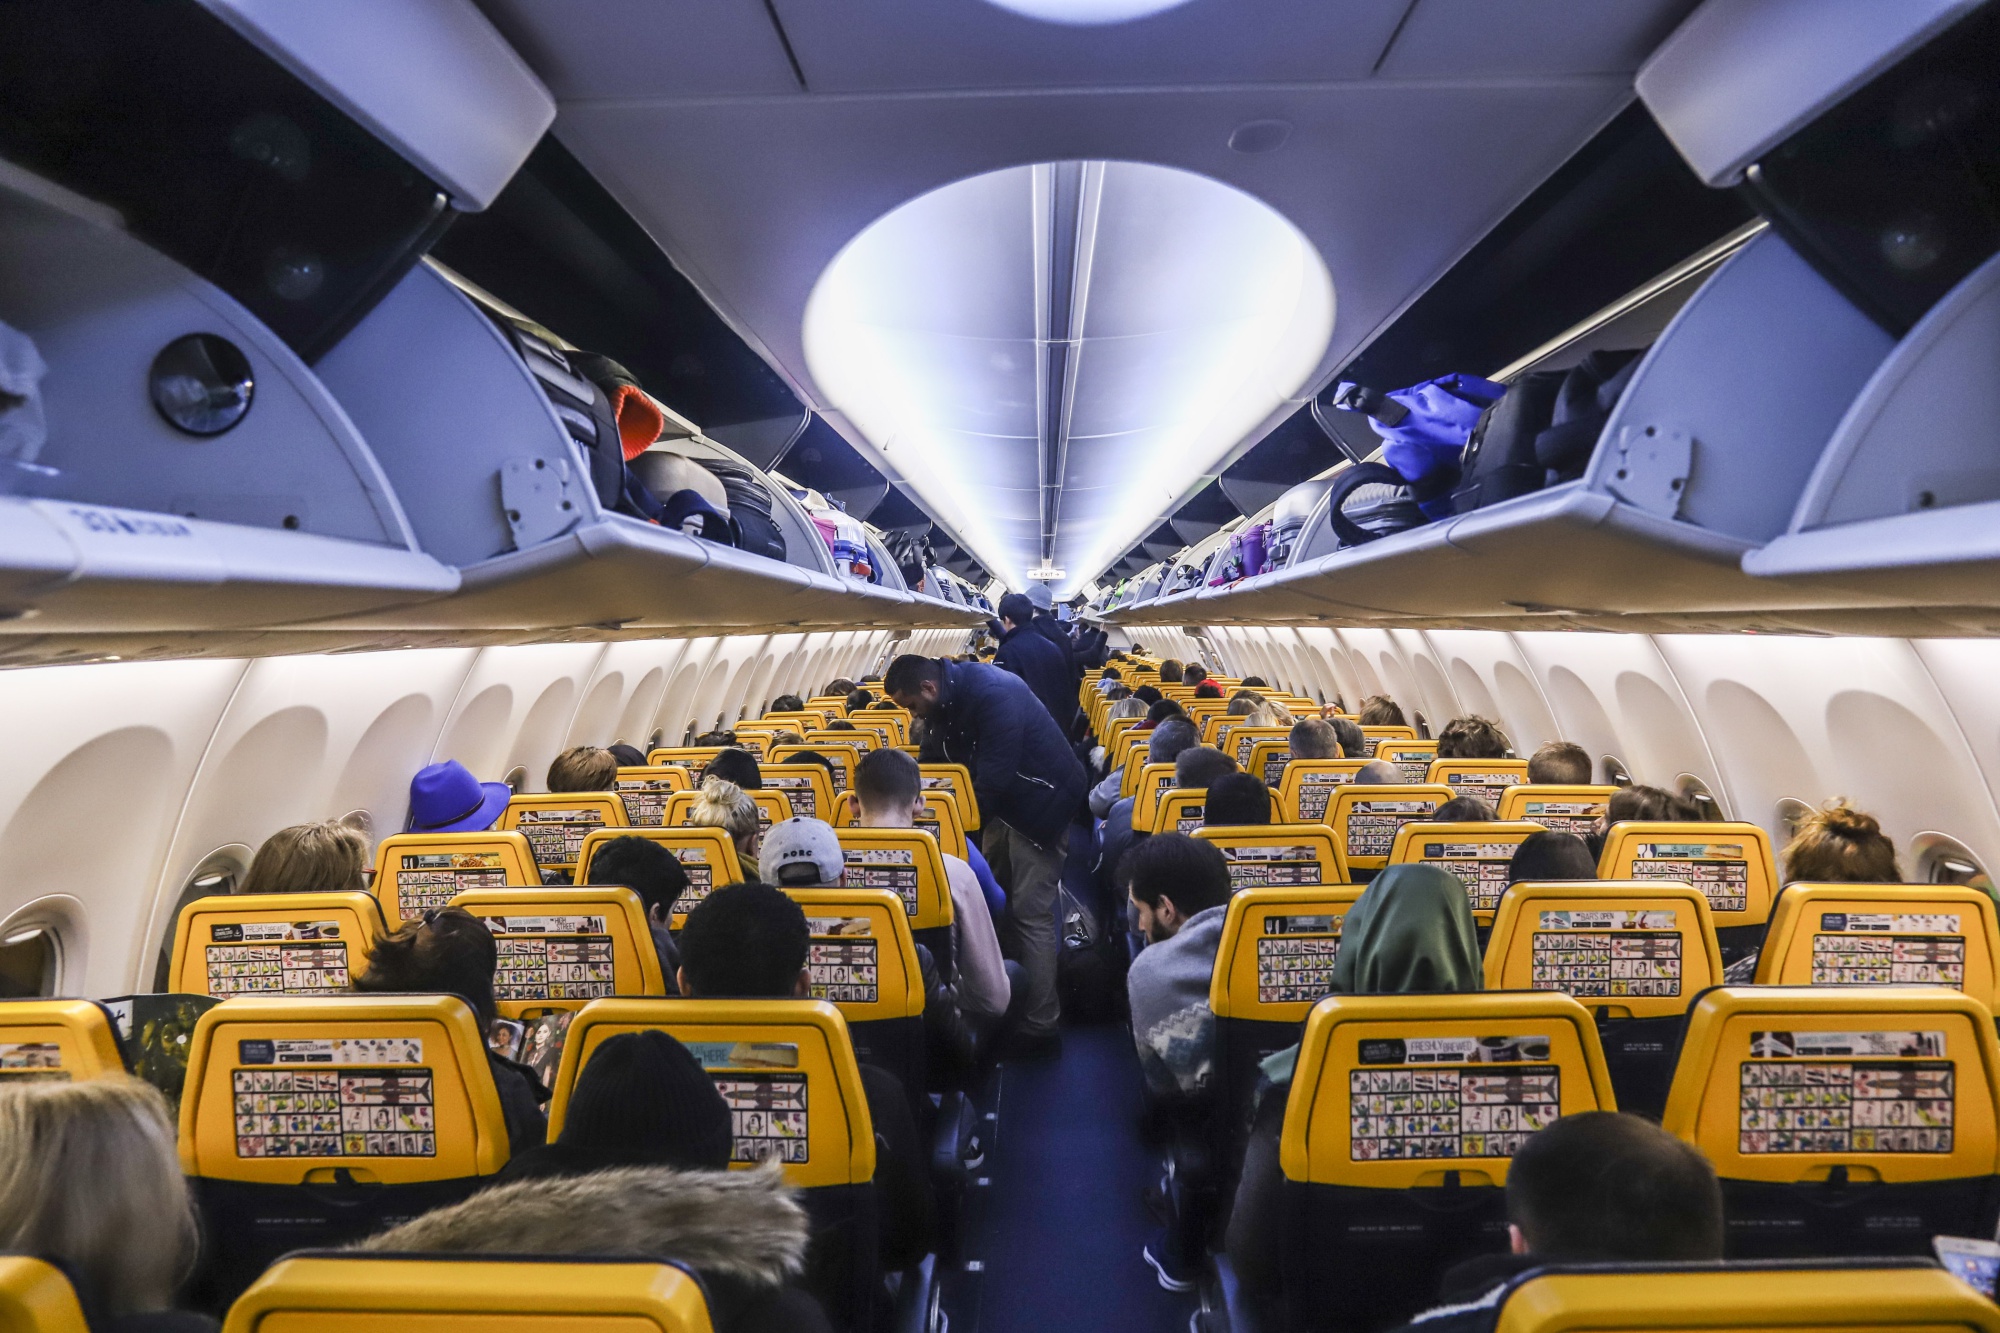 Think Legroom on Planes Is Bad Now? It's About to Get Much Worse - Bloomberg